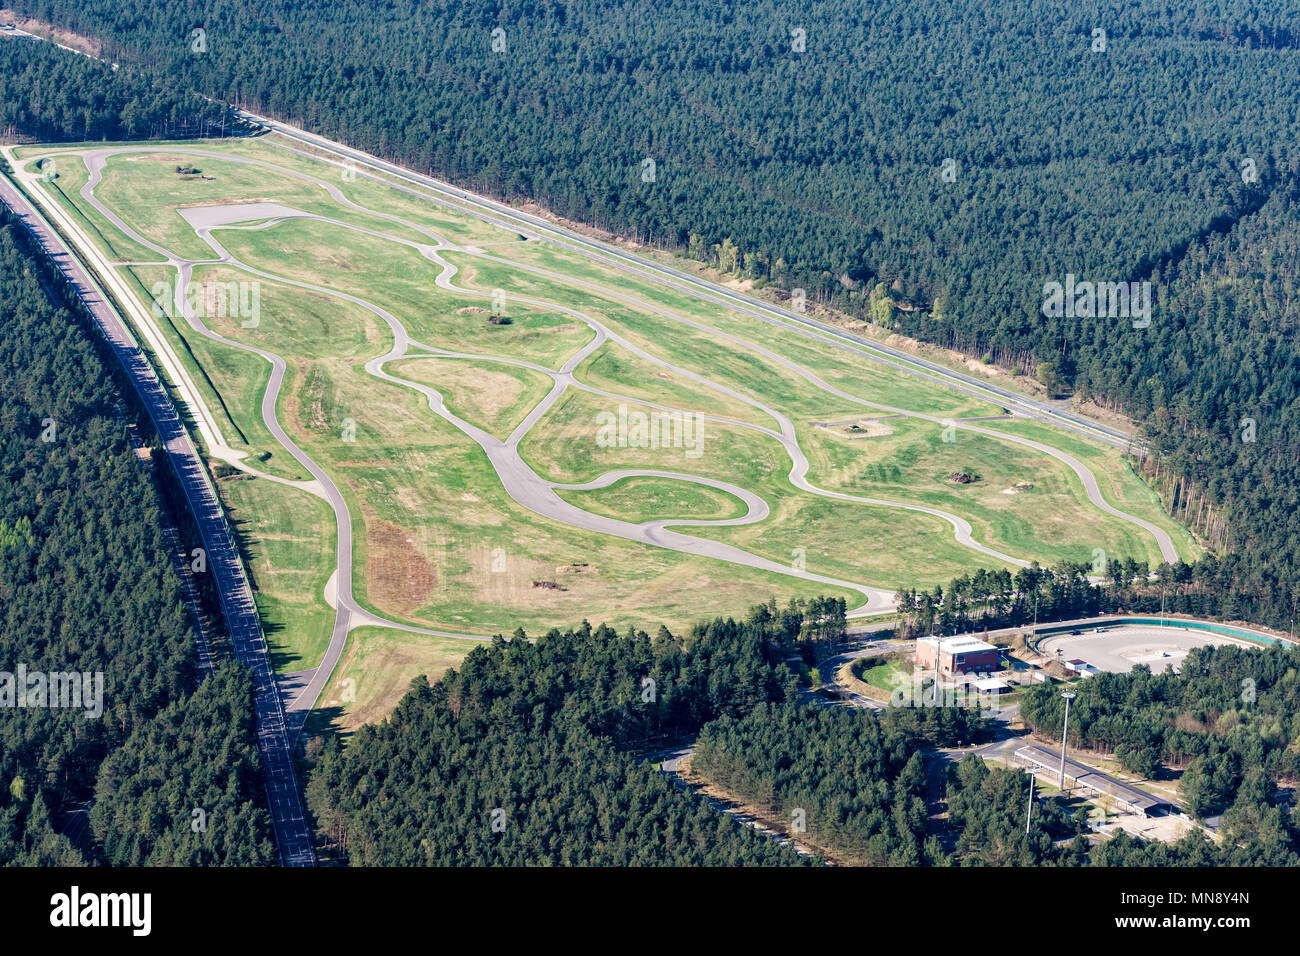 Aerial view, Volkswagen AG test track Ehra-Lessien, racetrack, Ehra section of the Volkswagen factory in Wolfsburg Stock Photo